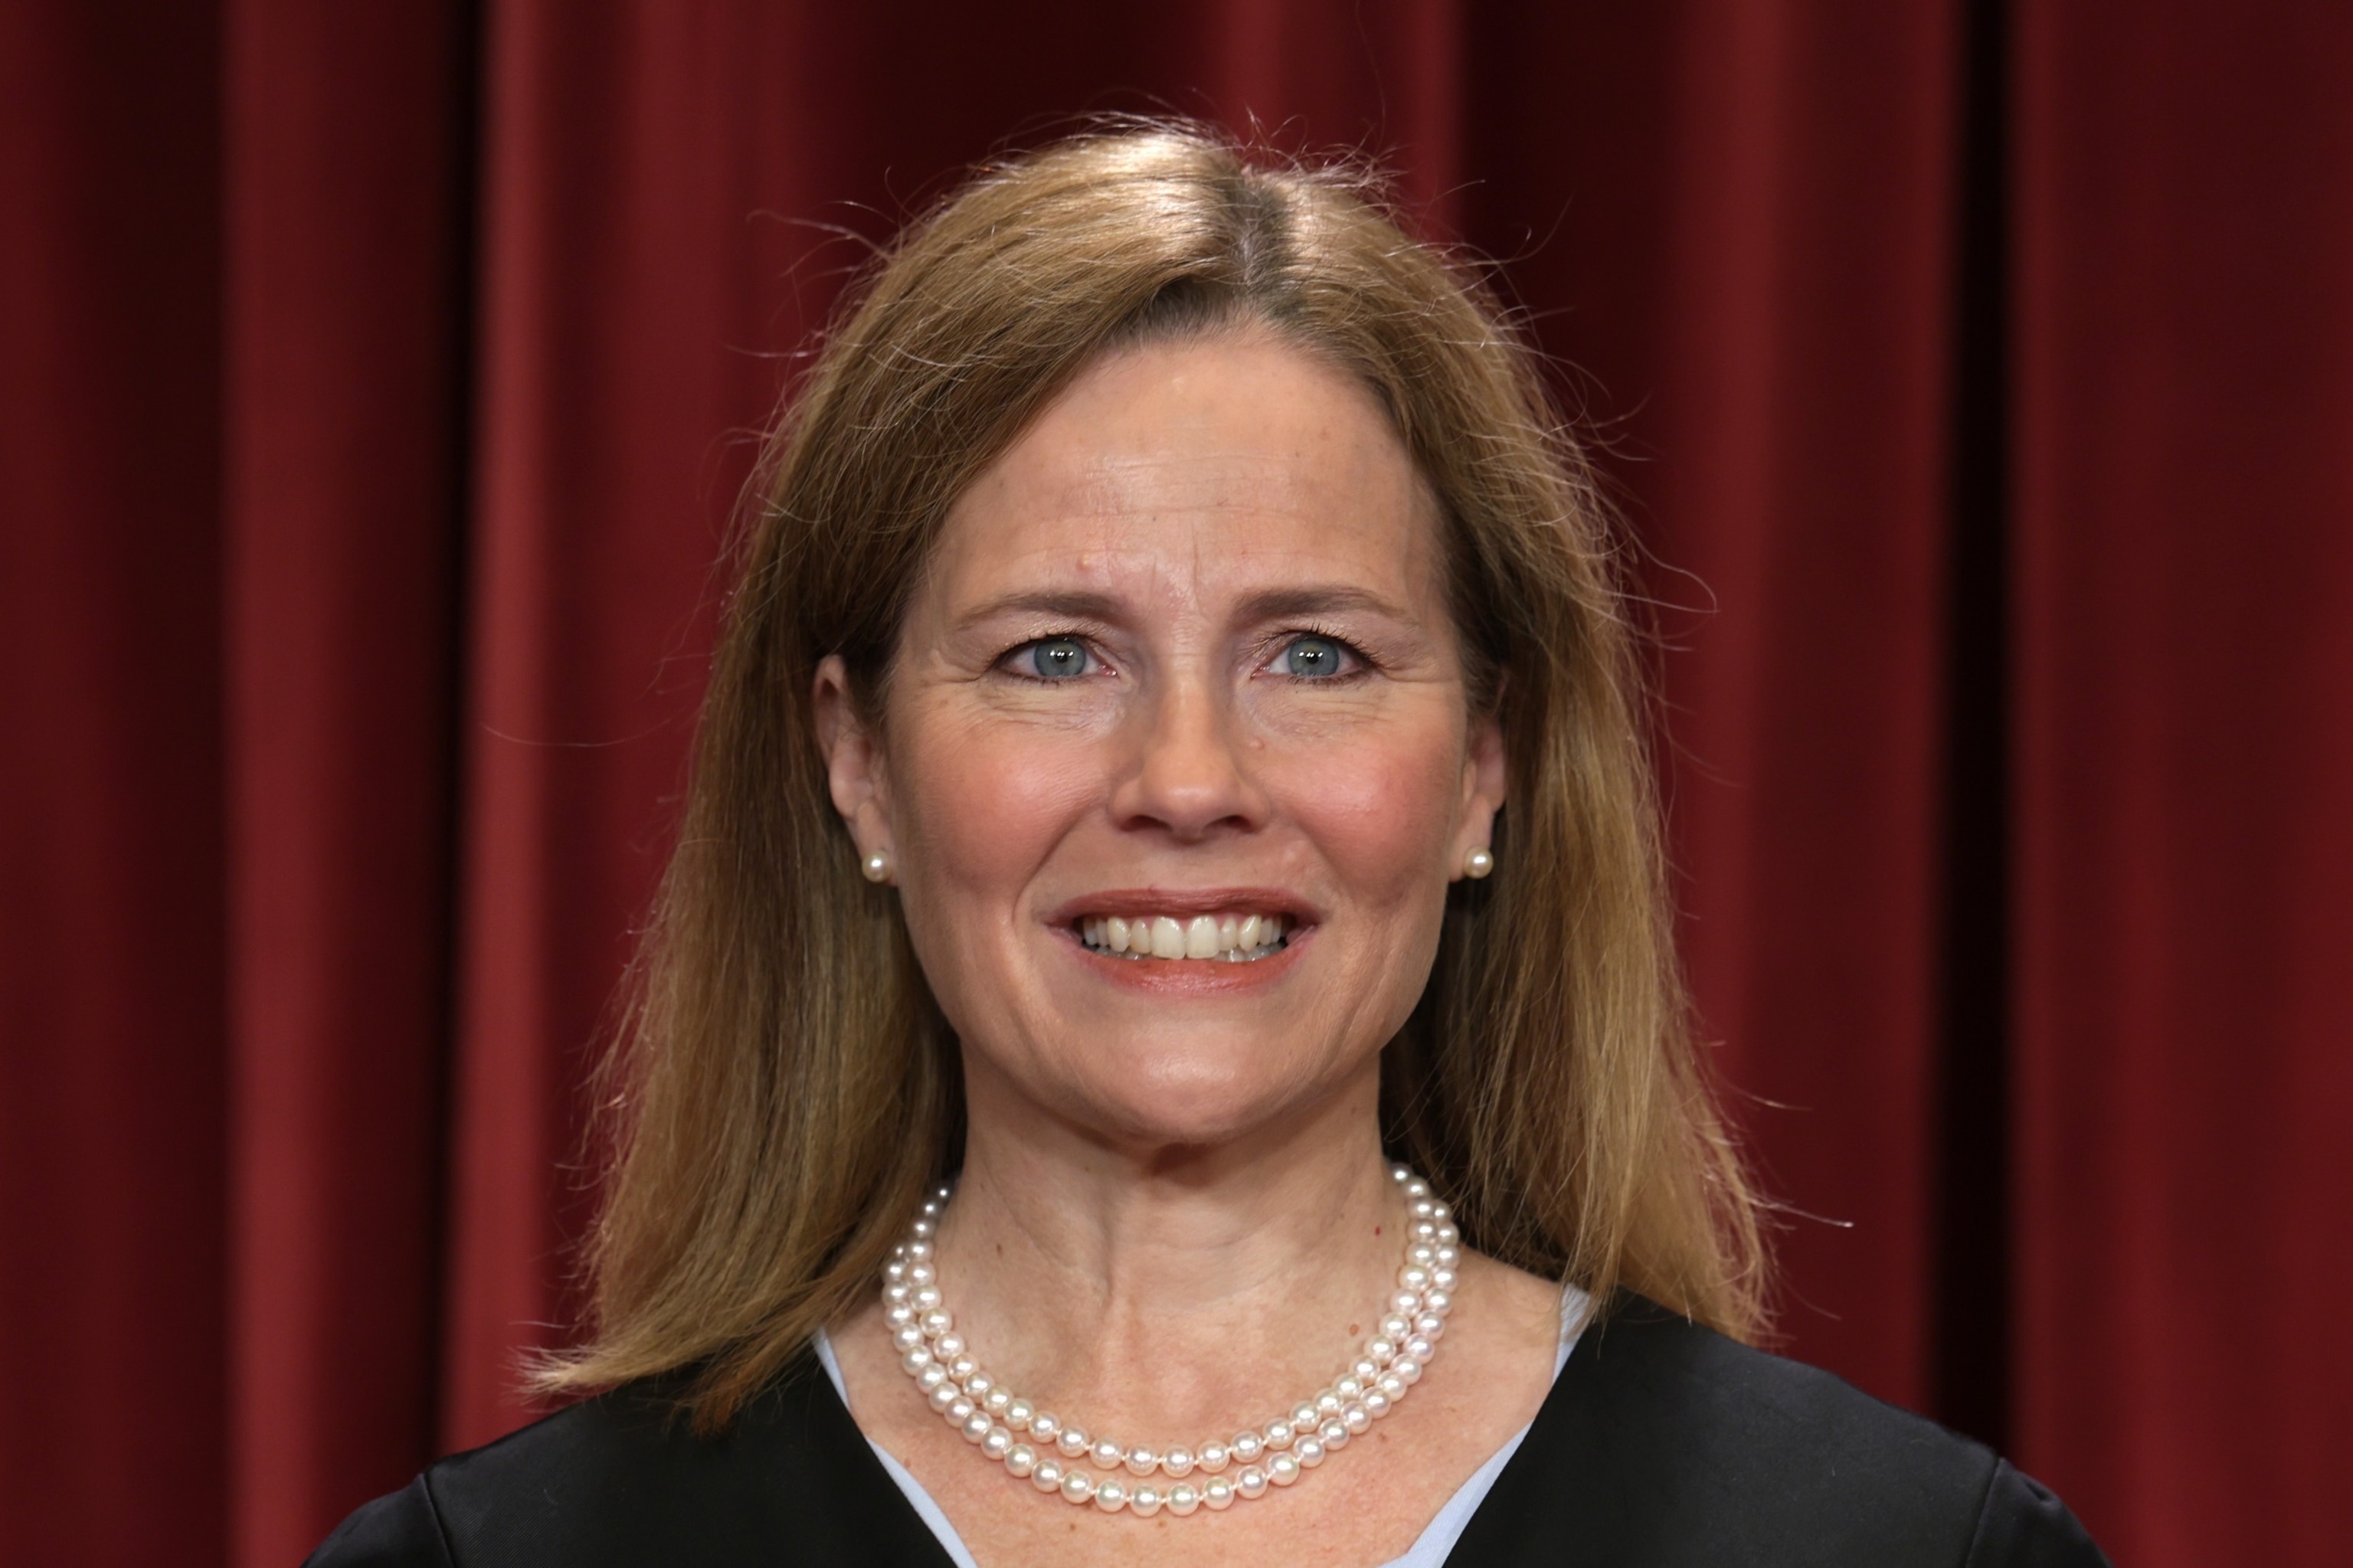 PHOTO: United States Supreme Court Associate Justice Amy Coney Barrett poses for an official portrait in the Supreme Court building in Washington, D.C., Oct. 7, 2022.